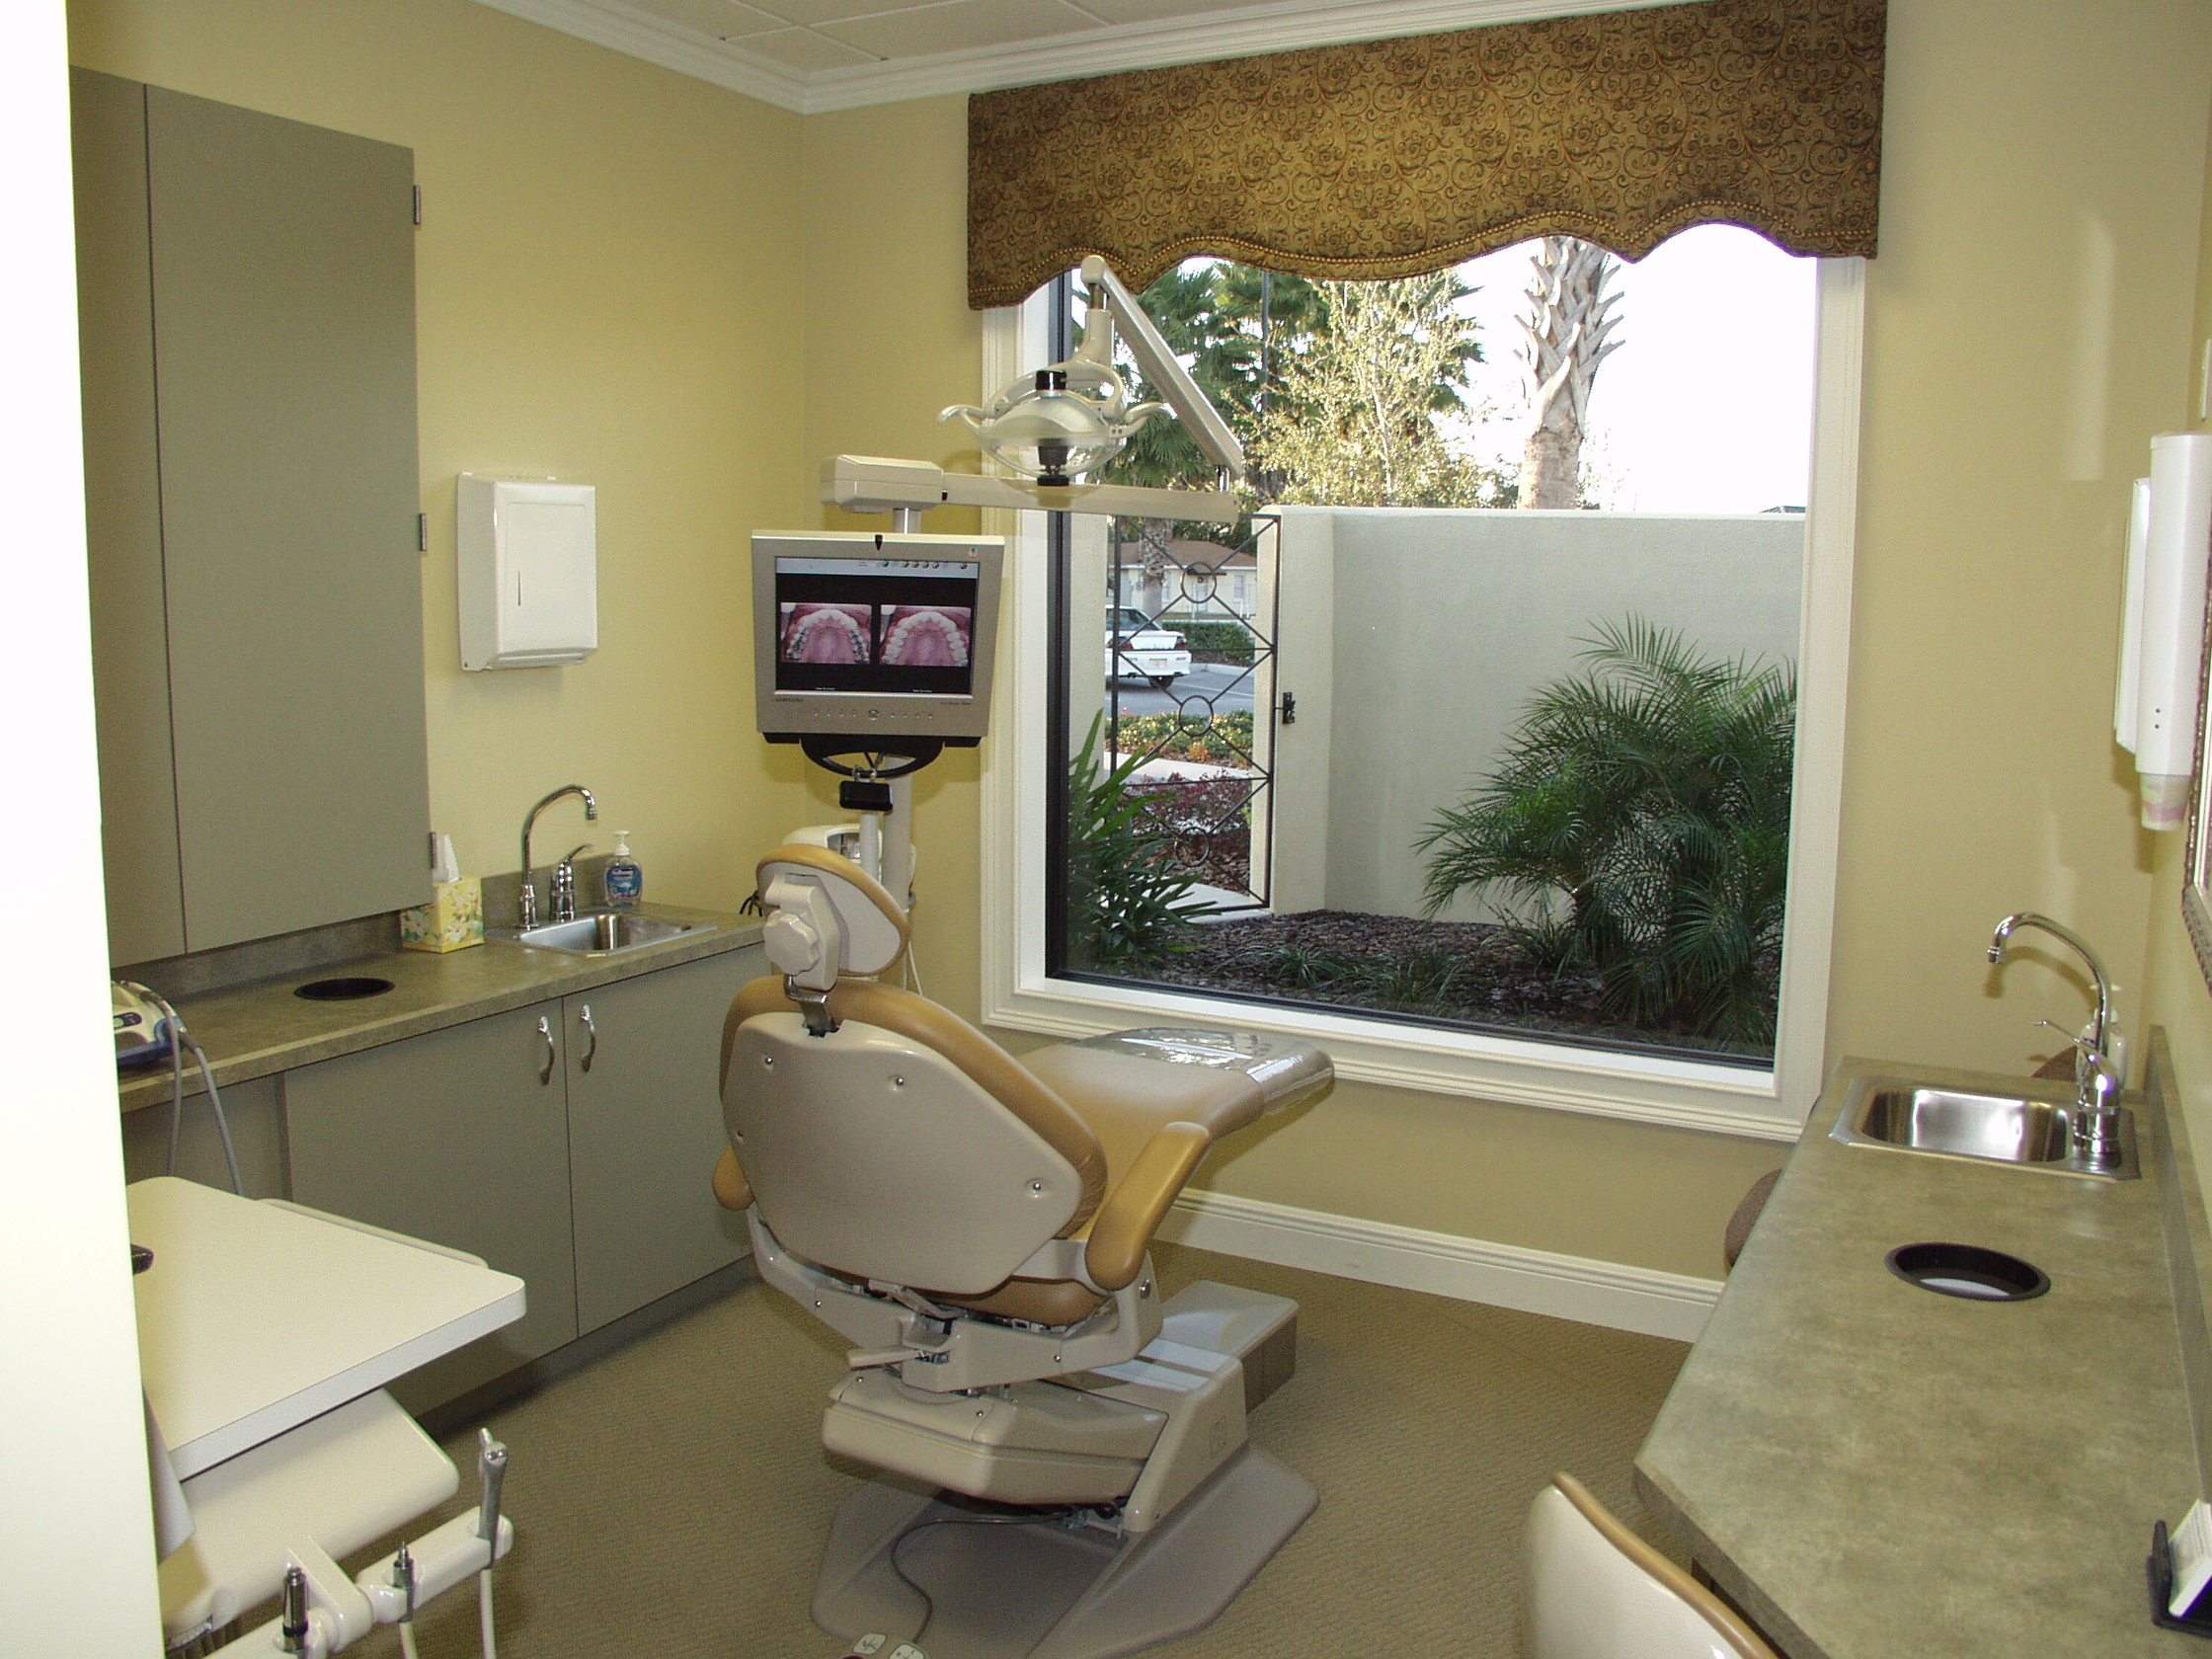 Dental Office Designs Dentists HD Wallpaper Pictures Top dental office